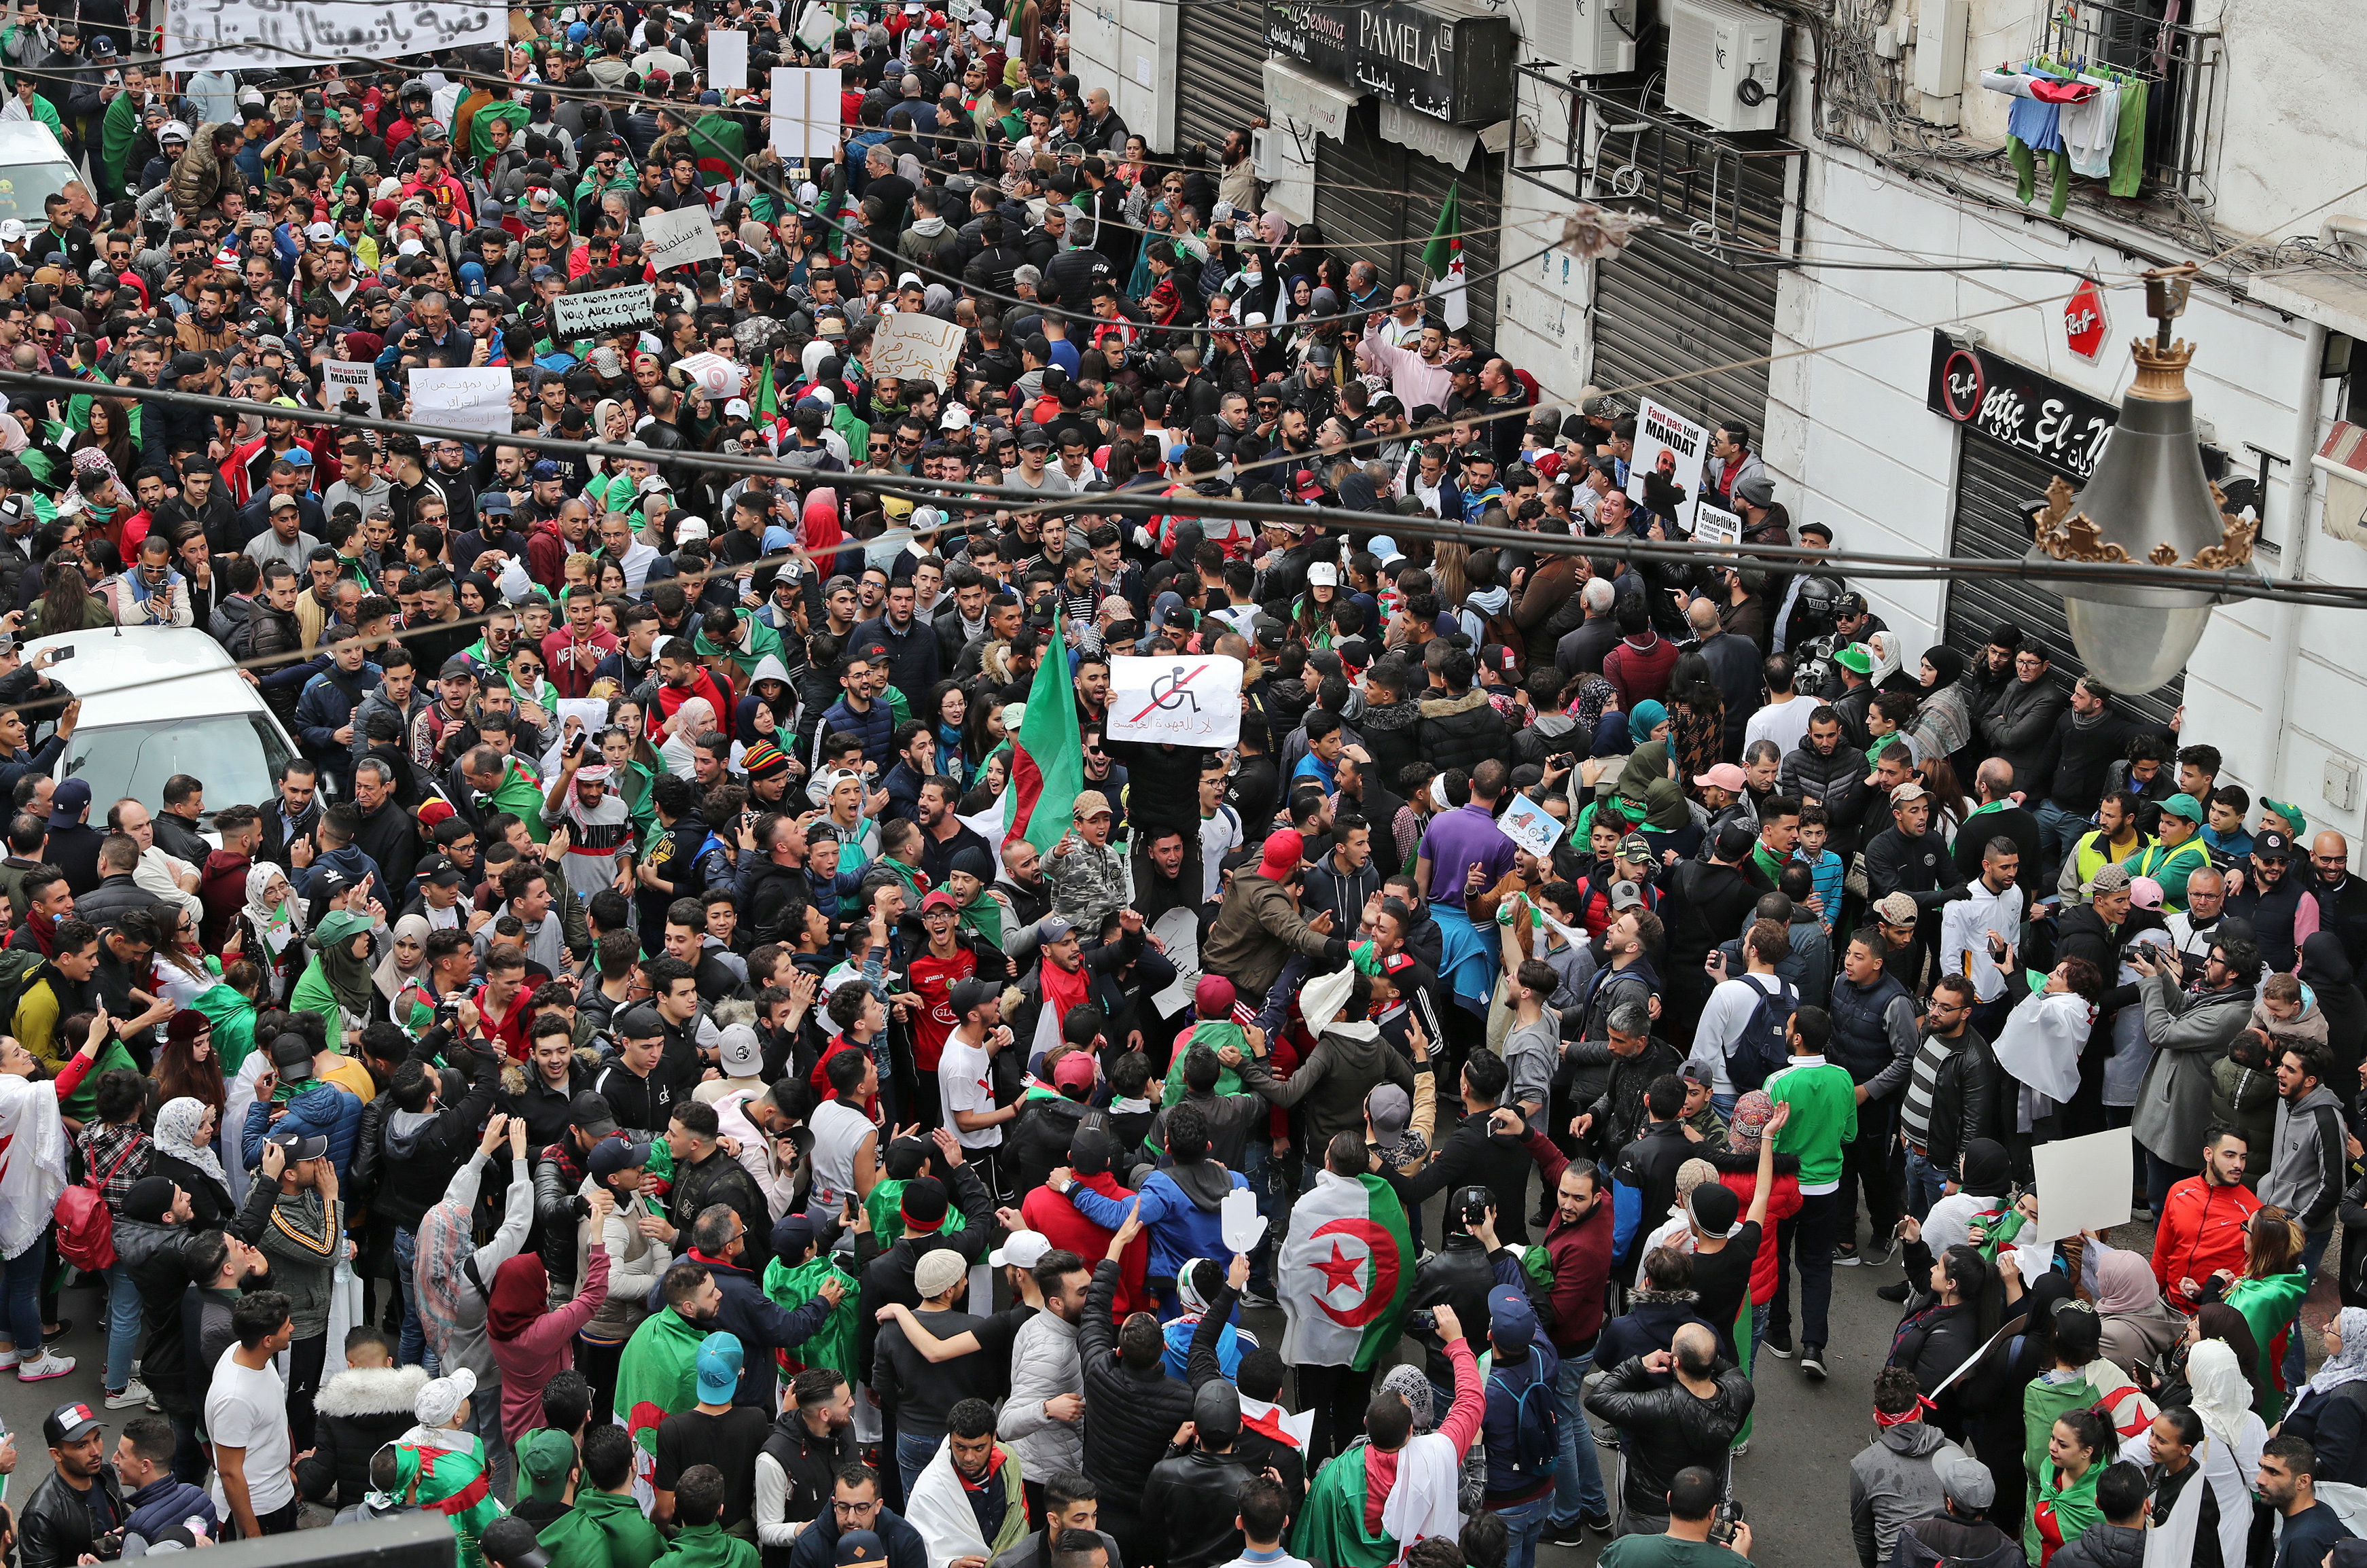 epa07422708 Algerian protesters during a protest against the fifth term of Abdelaziz Bouteflika in Algiers, Algeria, 08 March 2019. Algerian authorities on 01 March braced for what are expected to be the largest protests in the Algerian capital in over a decade. Several protests and rallies were held in Algeria since Bouteflika serving as the president since 1999, announced he will be running for a fifth term in presidential elections scheduled for 18 April 2019.  EPA/MOHAMED MESSARA